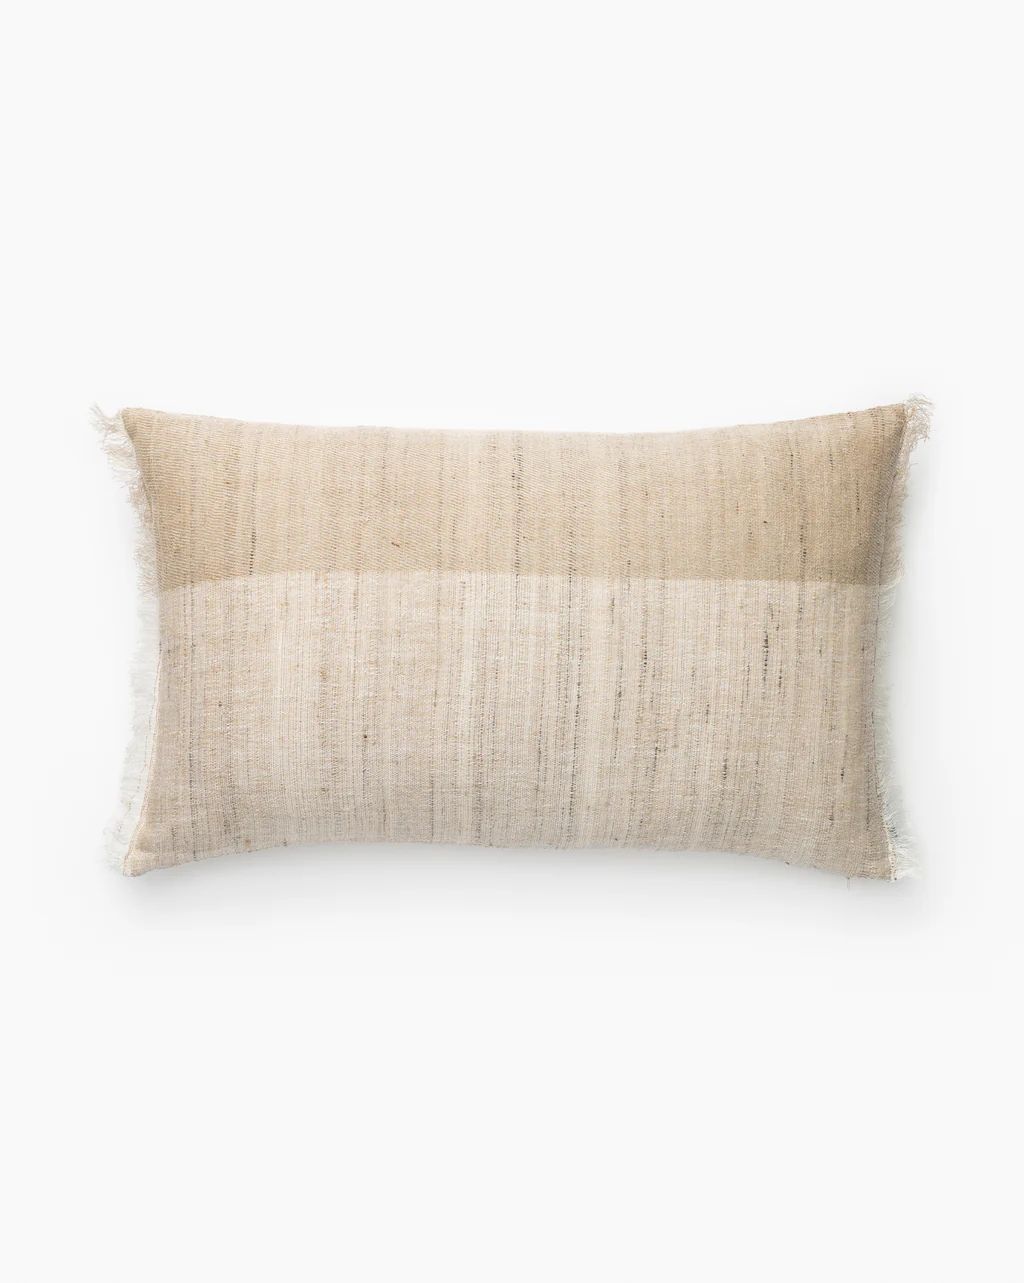 Suzie Pillow Cover | McGee & Co. (US)